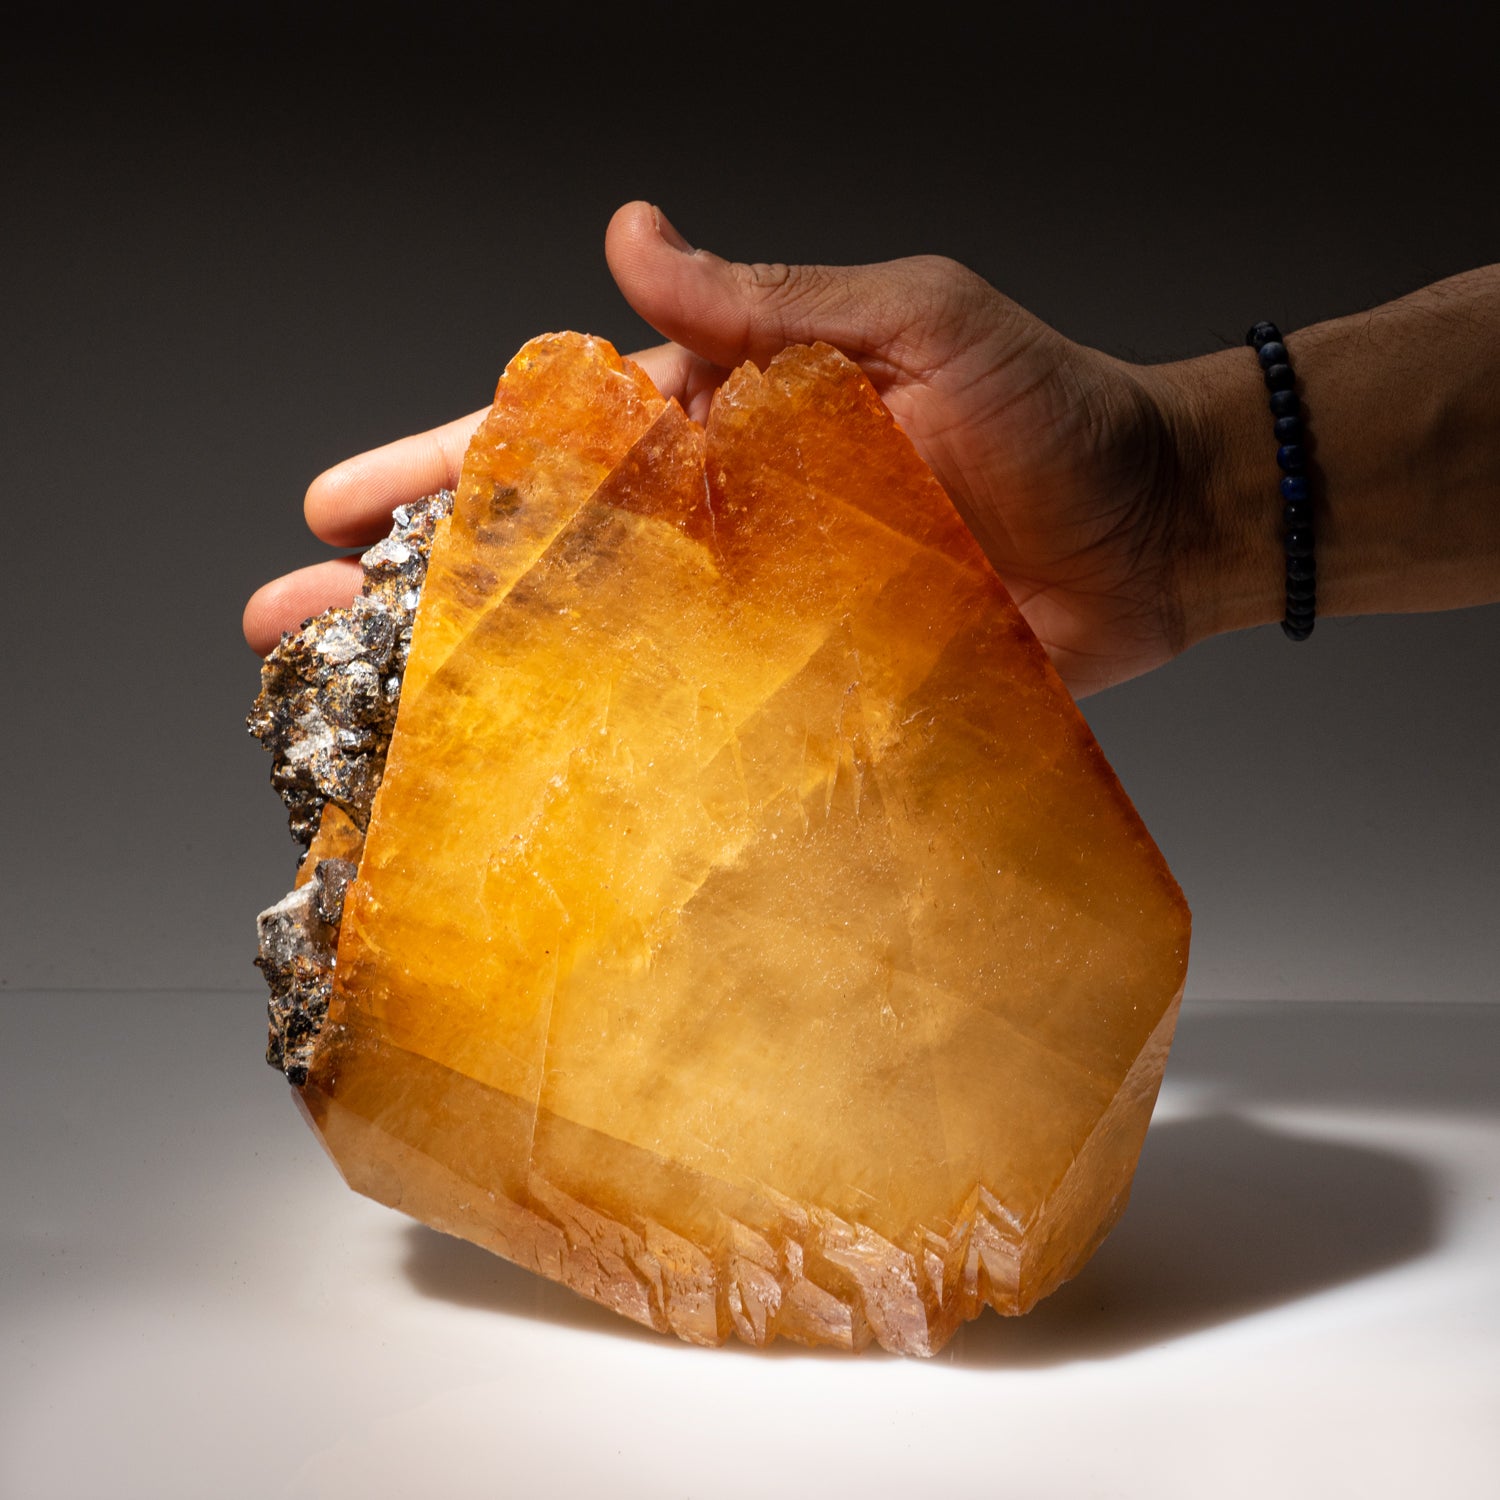 Golden Calcite Crystal from Elmwood Mine, Tennessee (6.5 lbs)